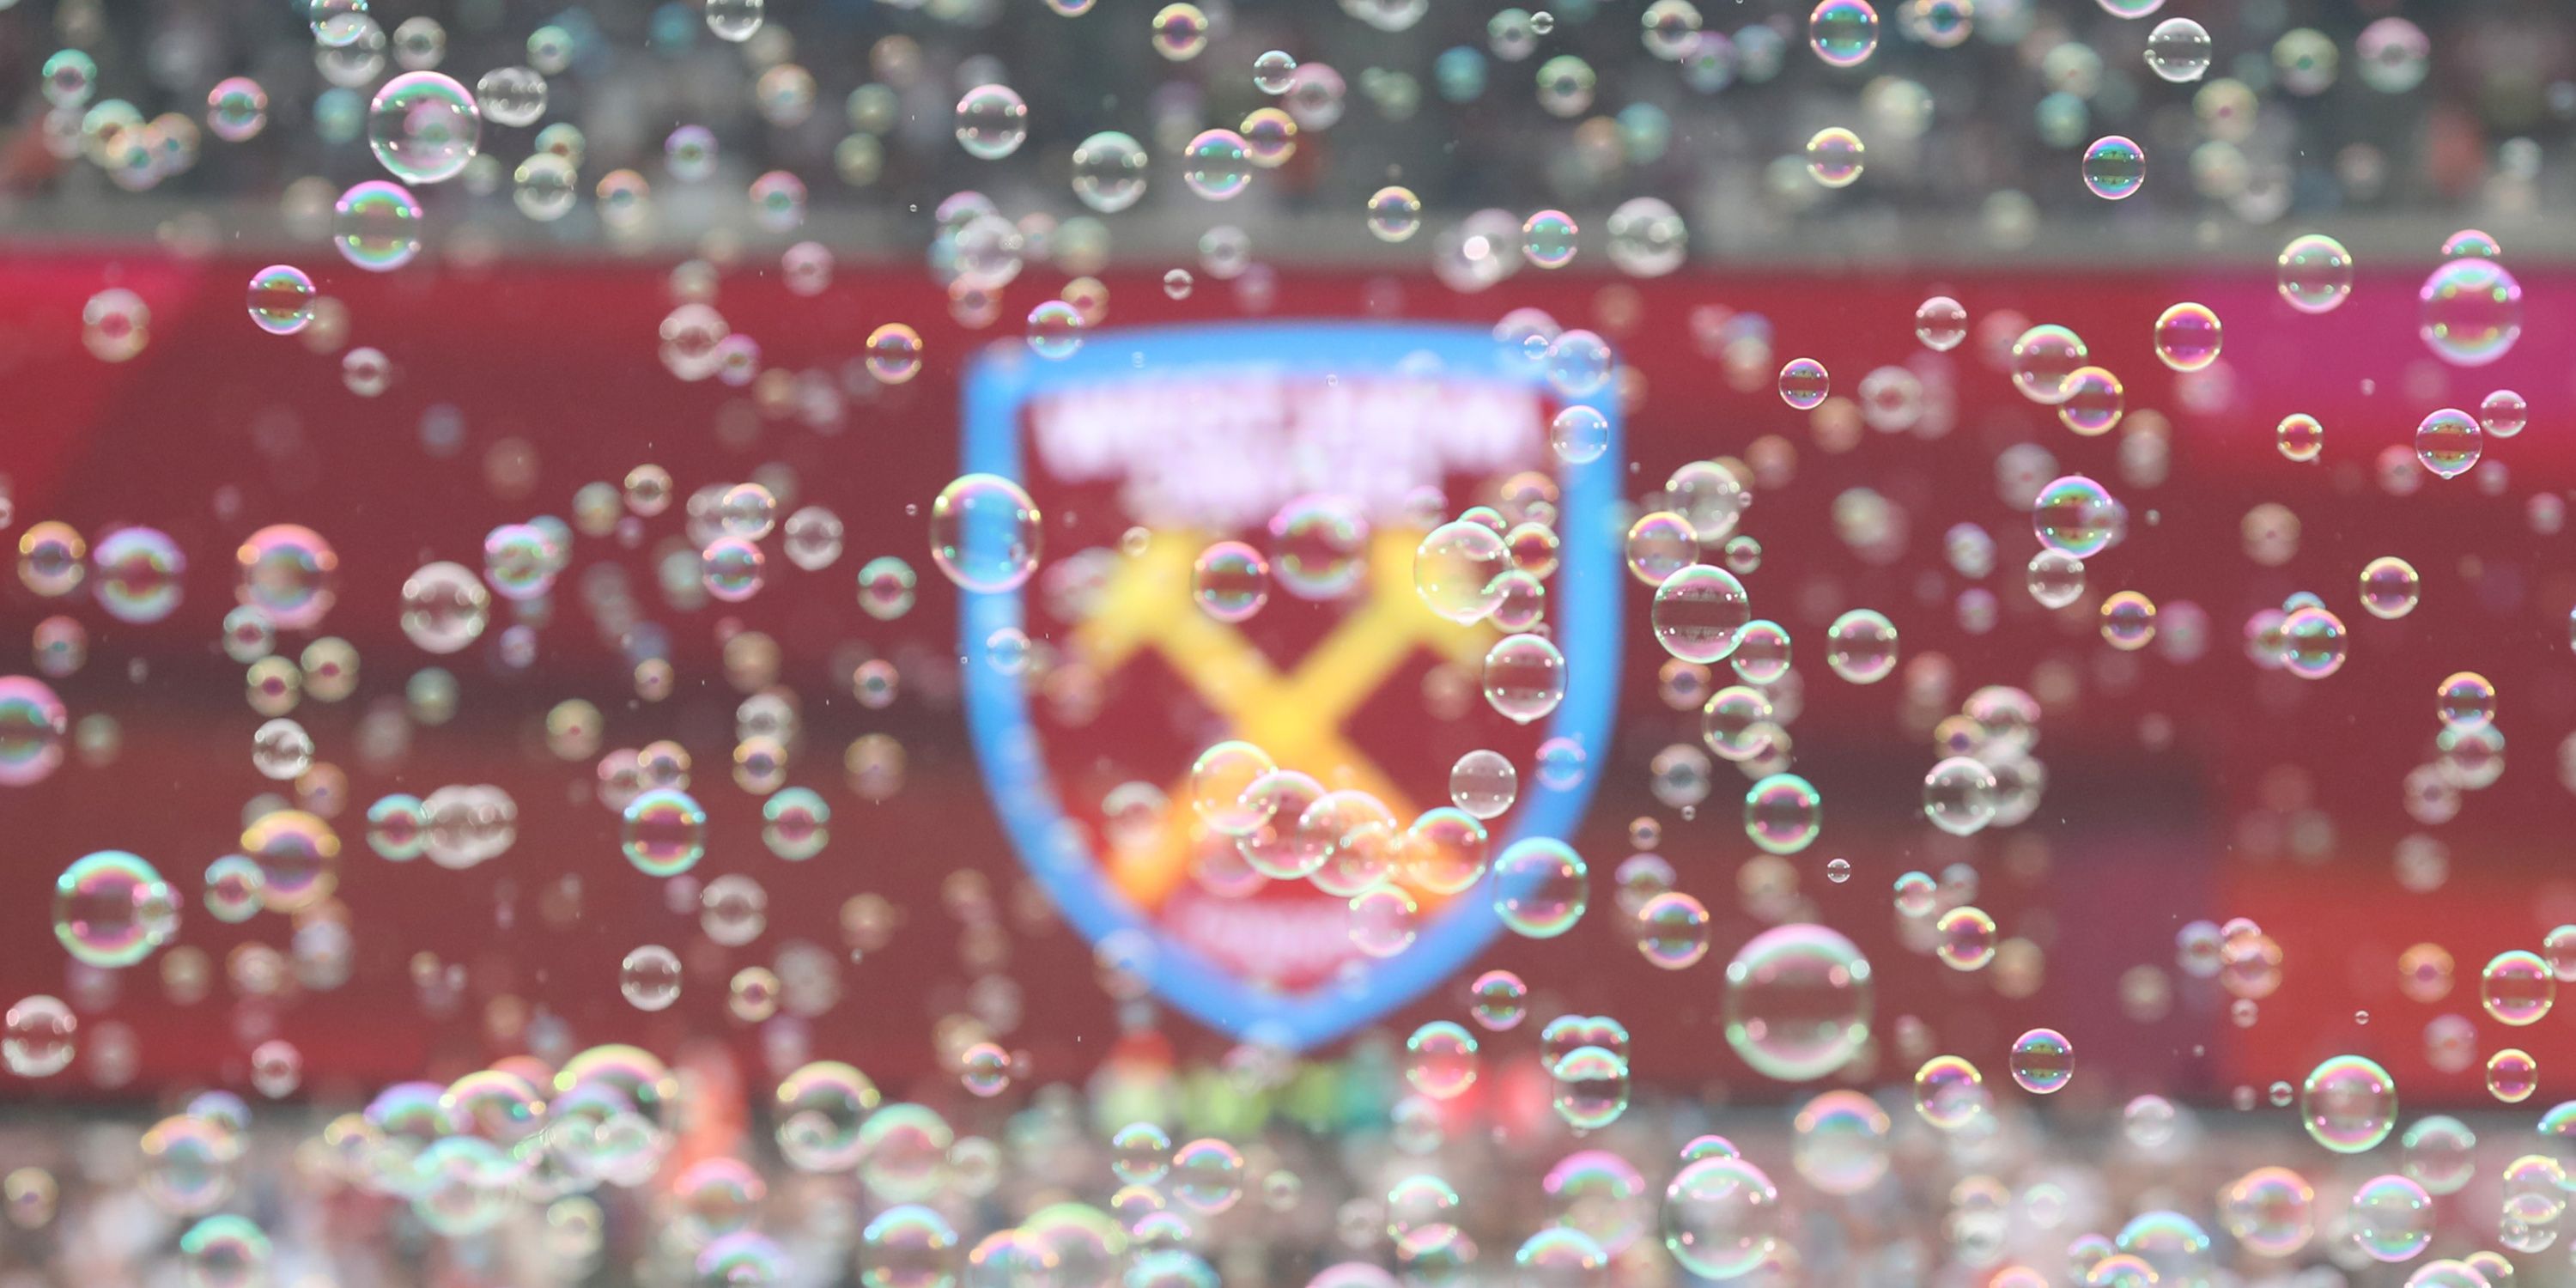 Bubbles fluttering in front of the West Ham badge